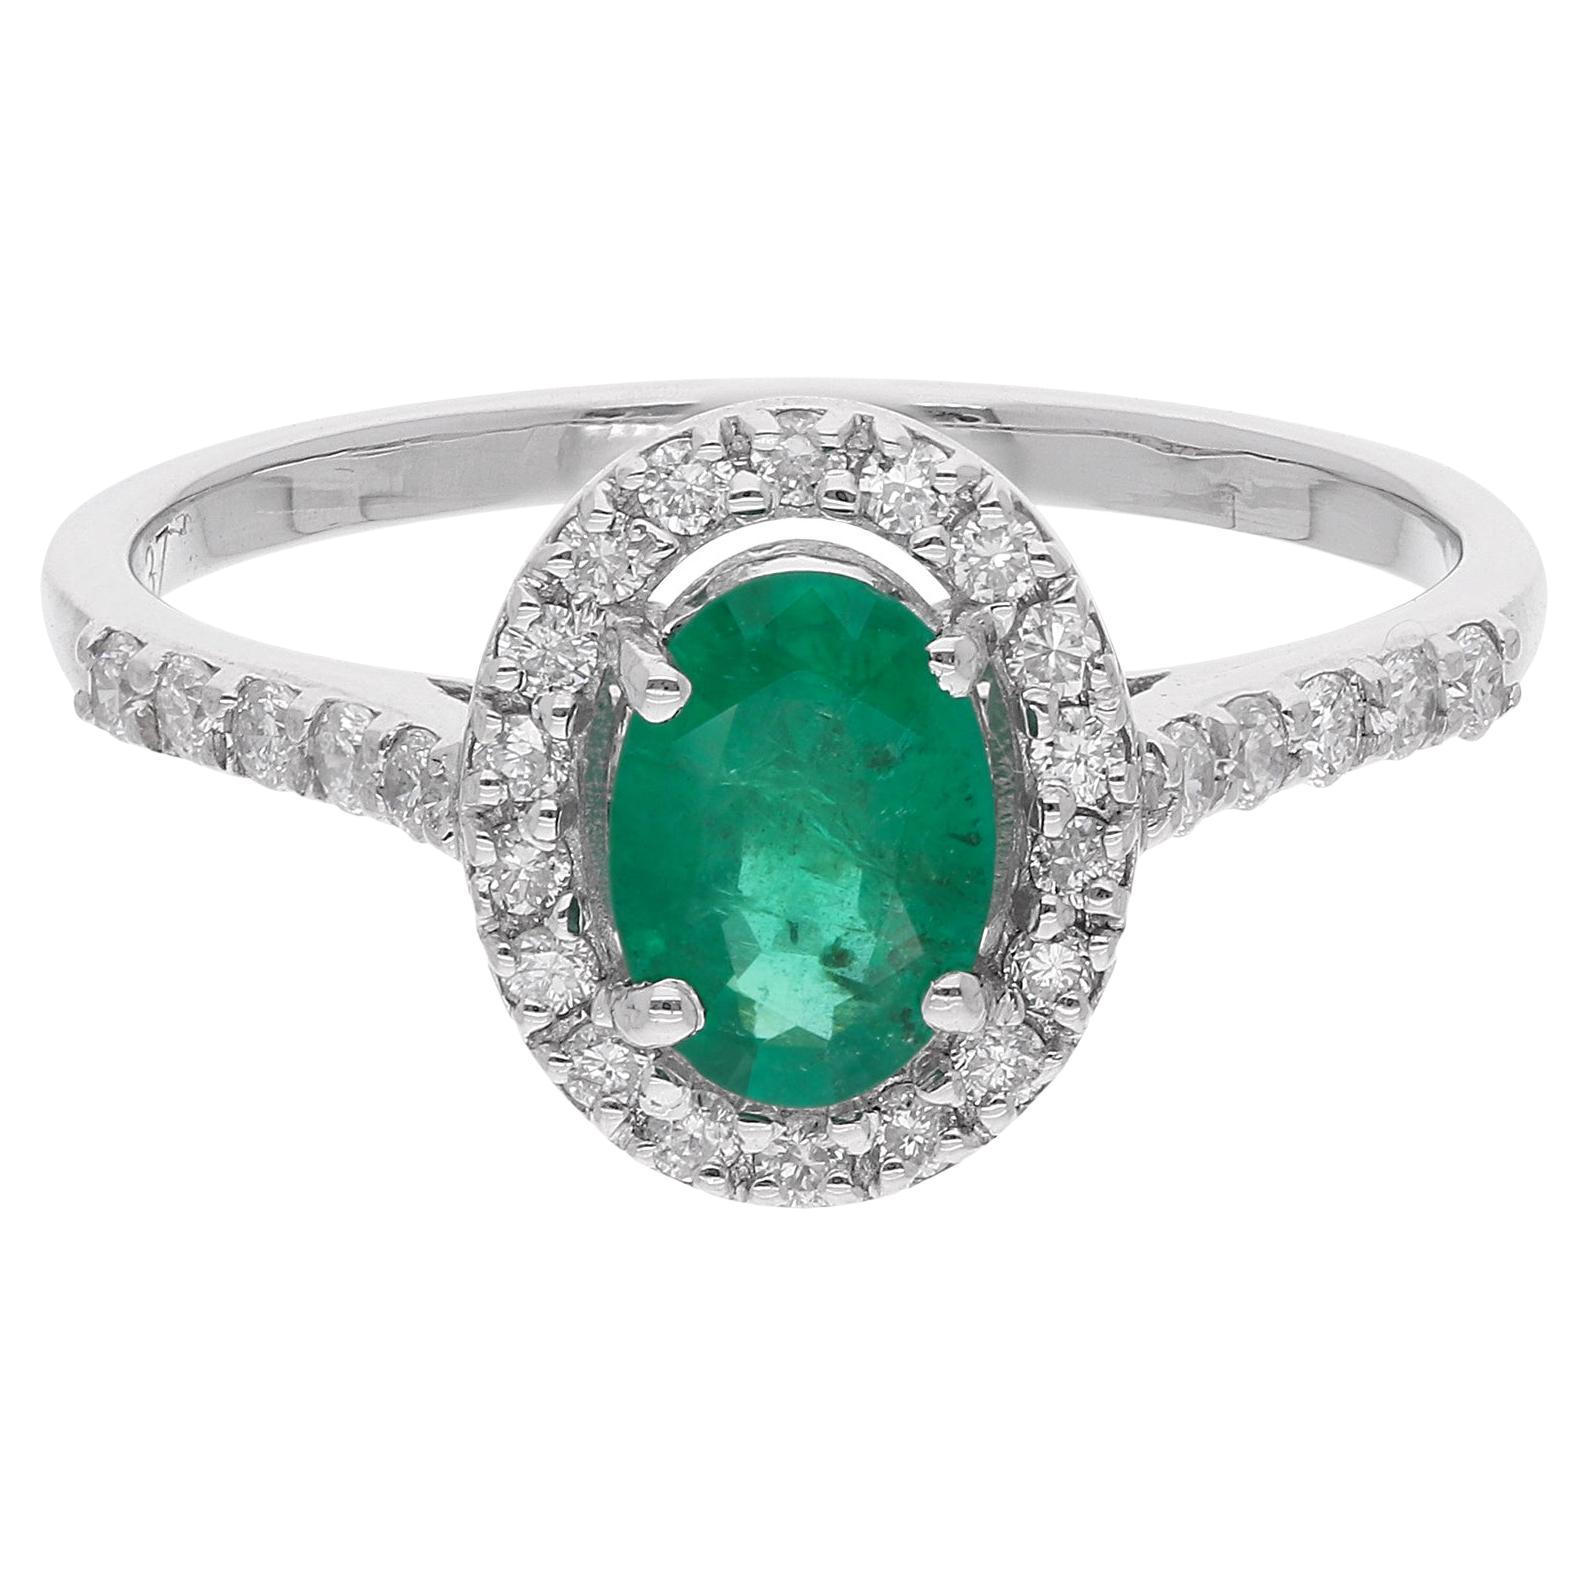 Oval Zambian Emerald Ring with Diamond Around Set in 14 White Gold Fine Jewelry For Sale